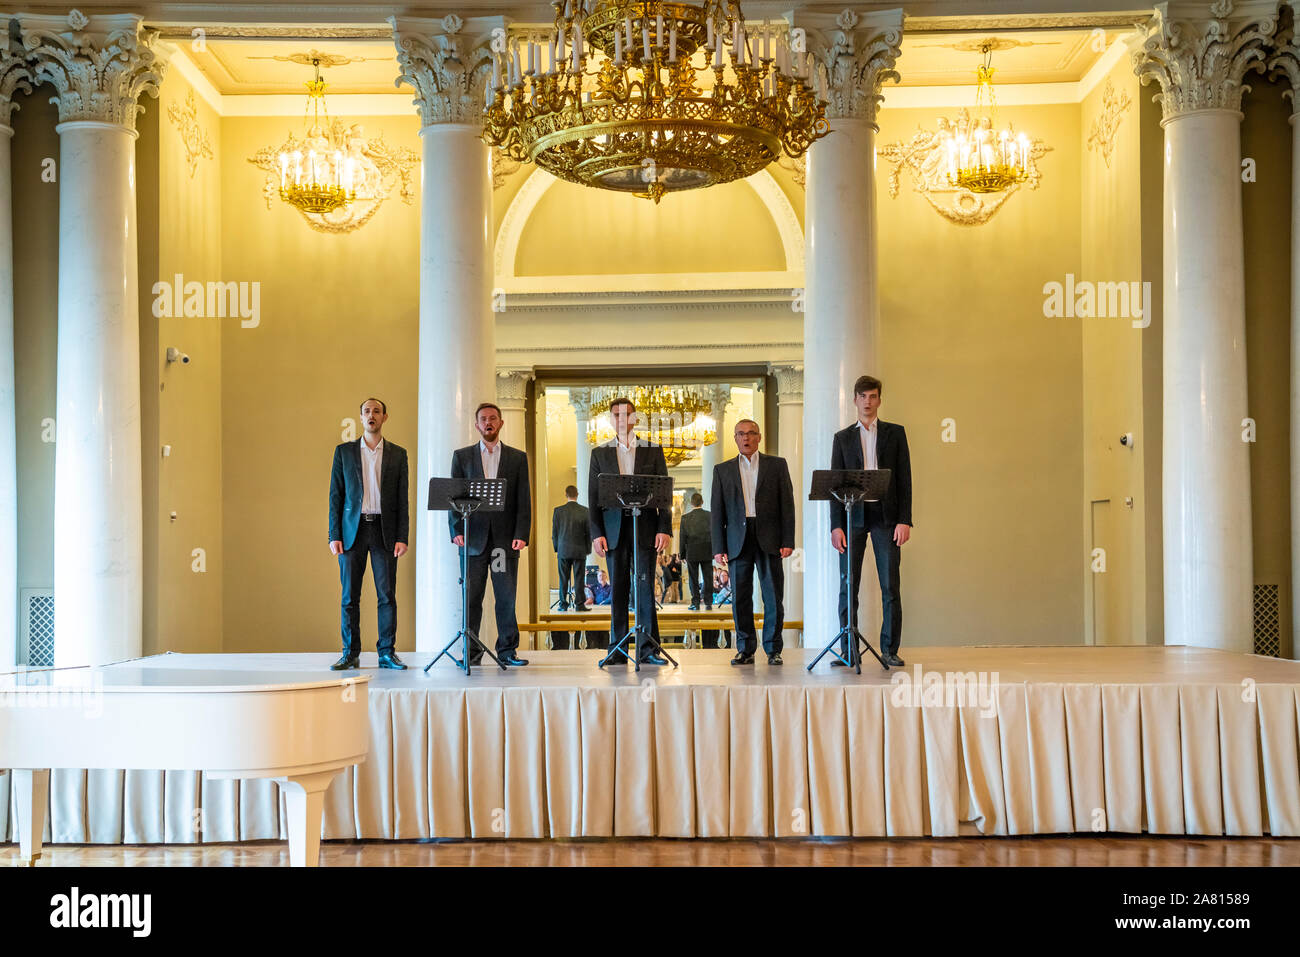 Men singing at  the Yusopov Palace in St. Petersburg, Russia. Stock Photo